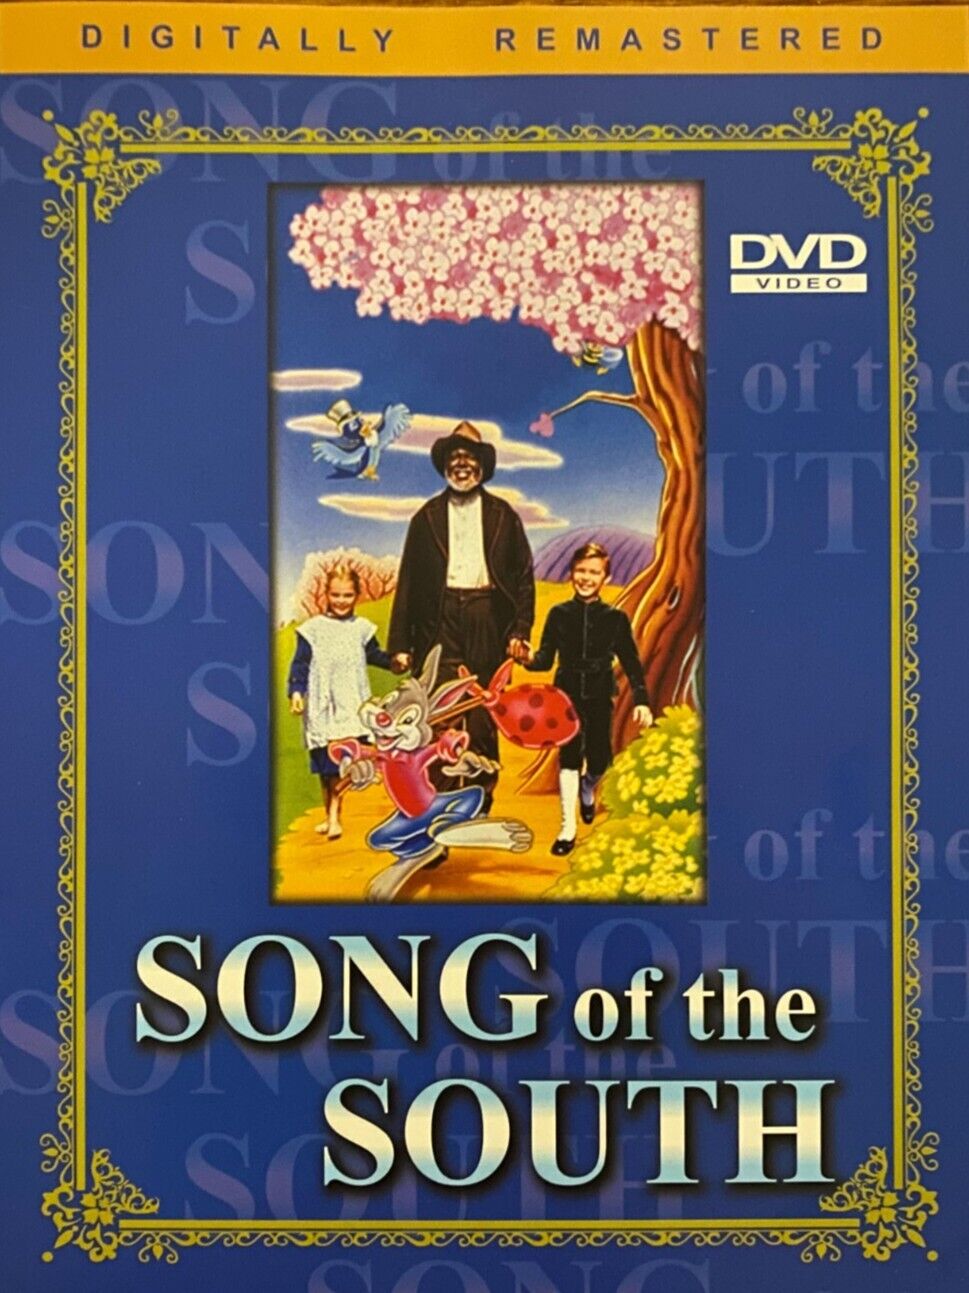 Song of the South (1946) - James Baskett, Ruth Warrick (Region All)